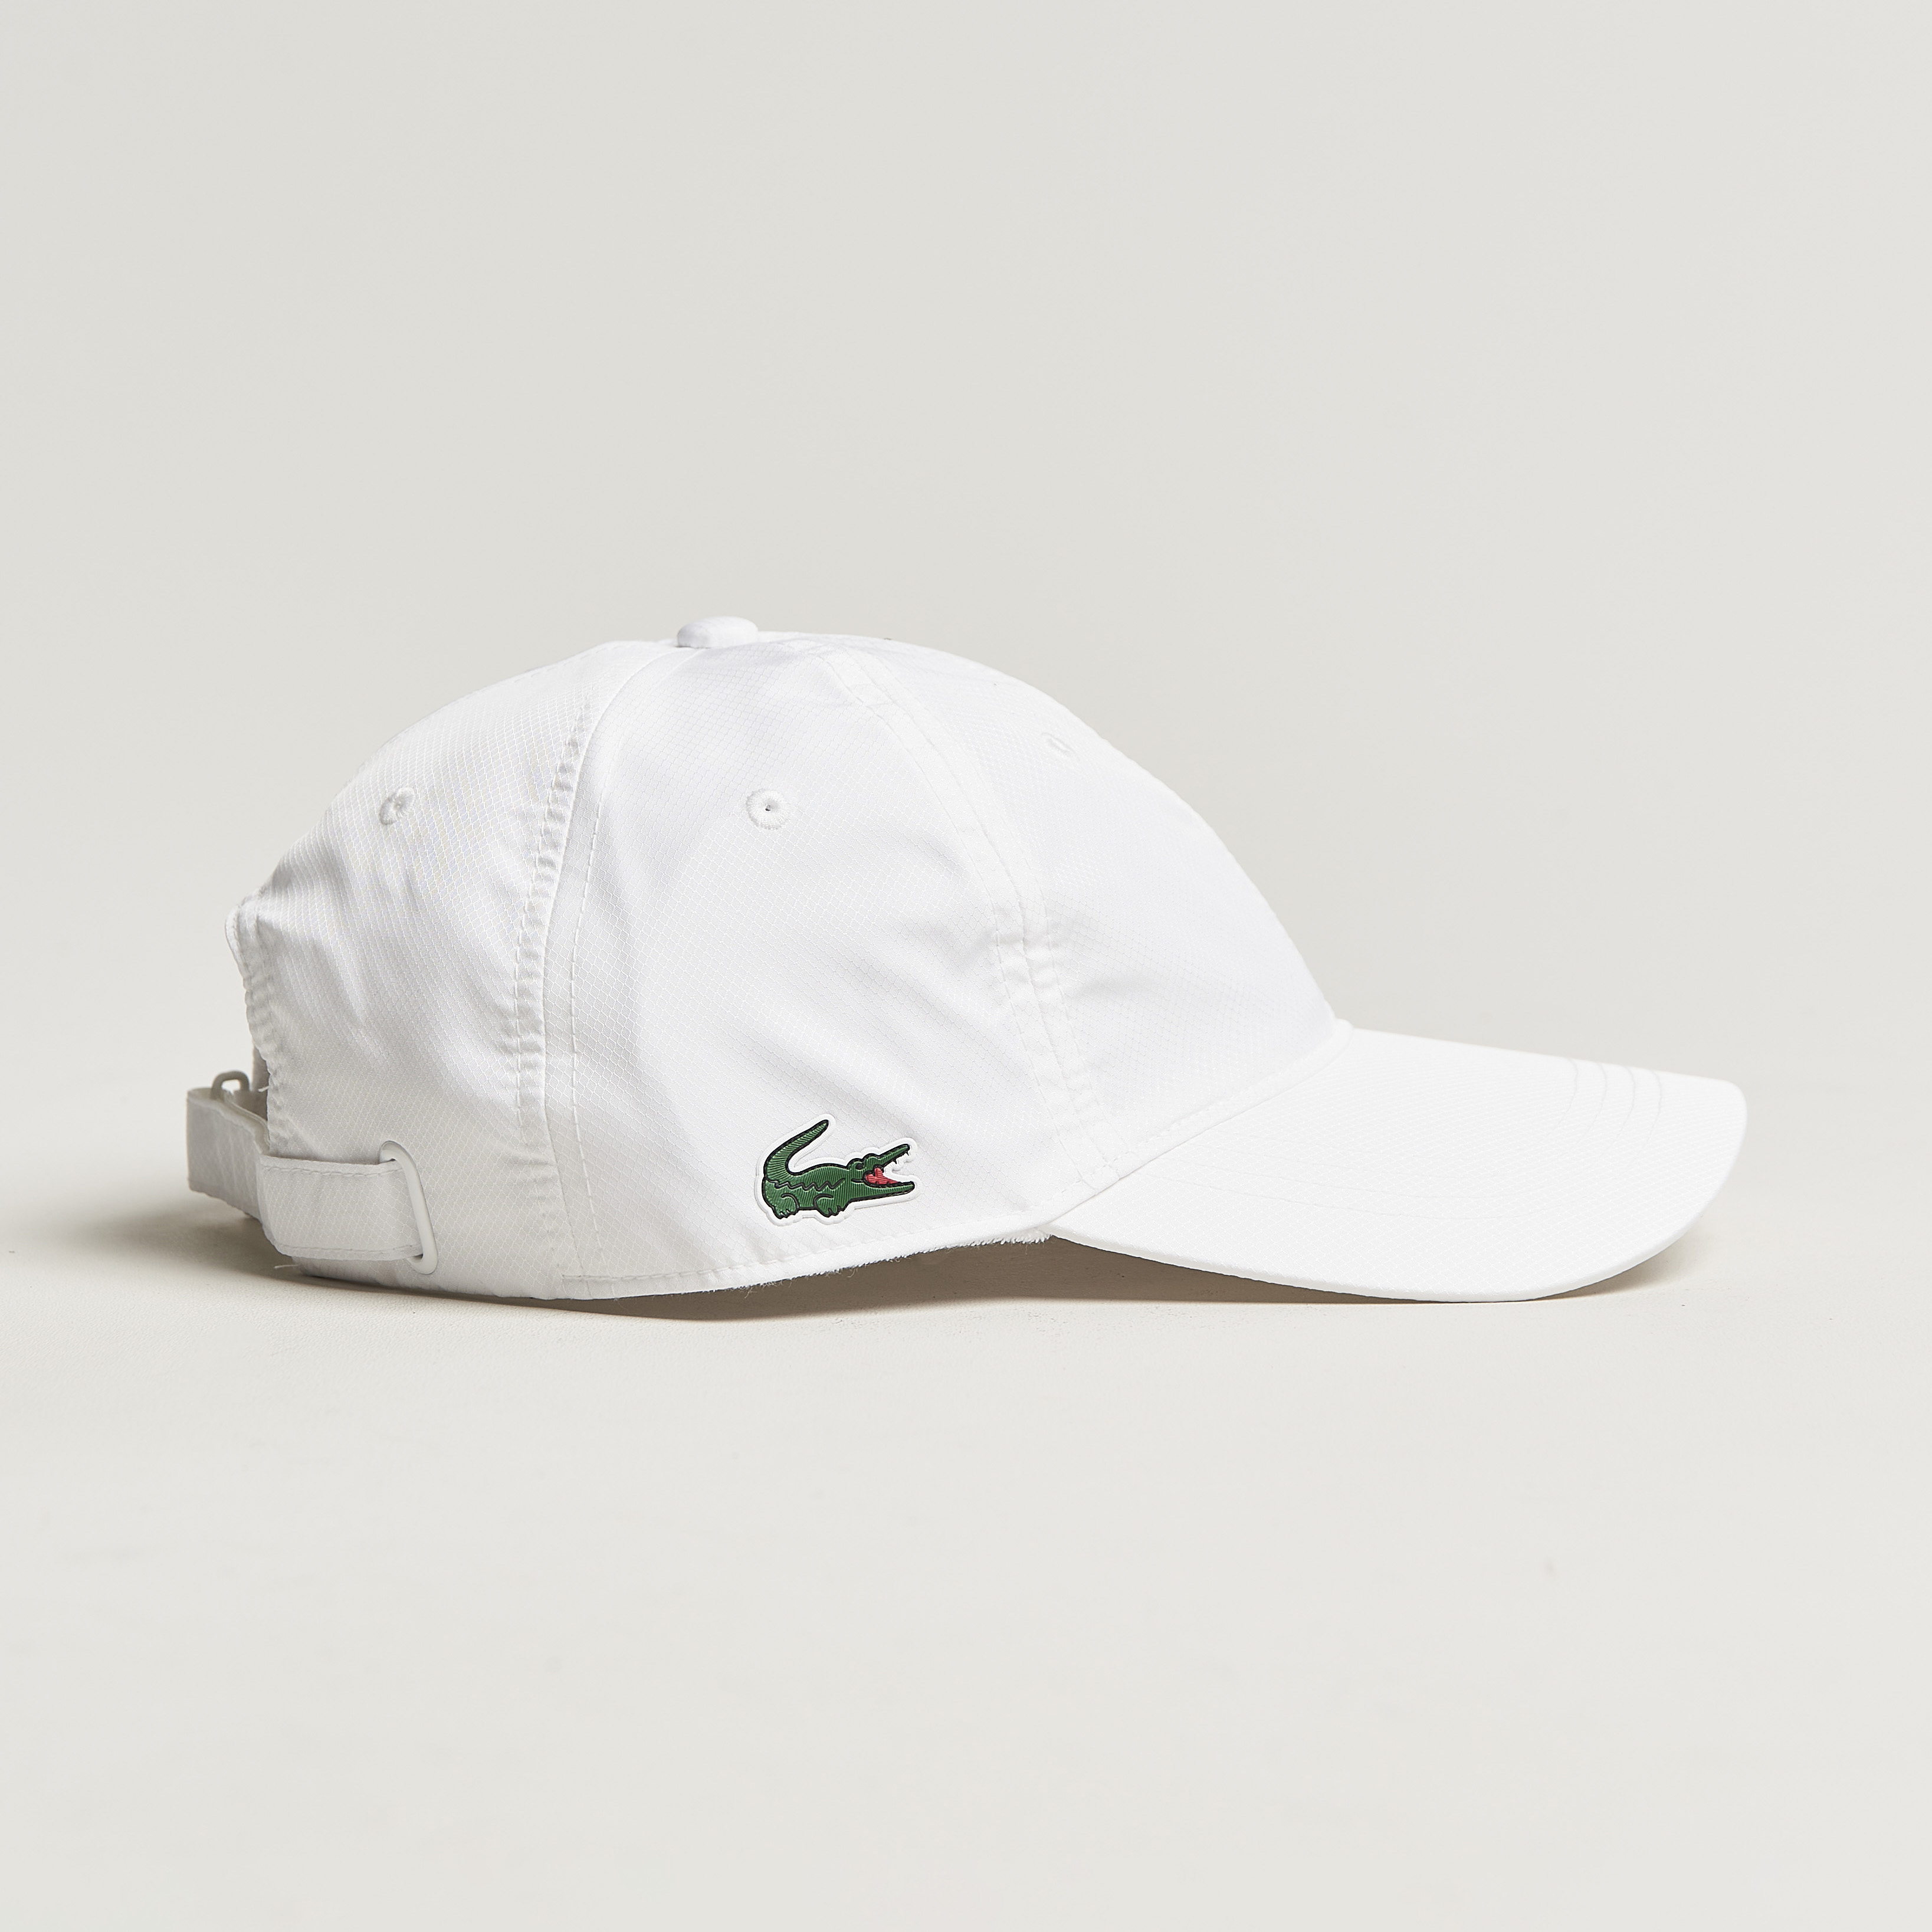 Sport Lacoste White at Cap Sports